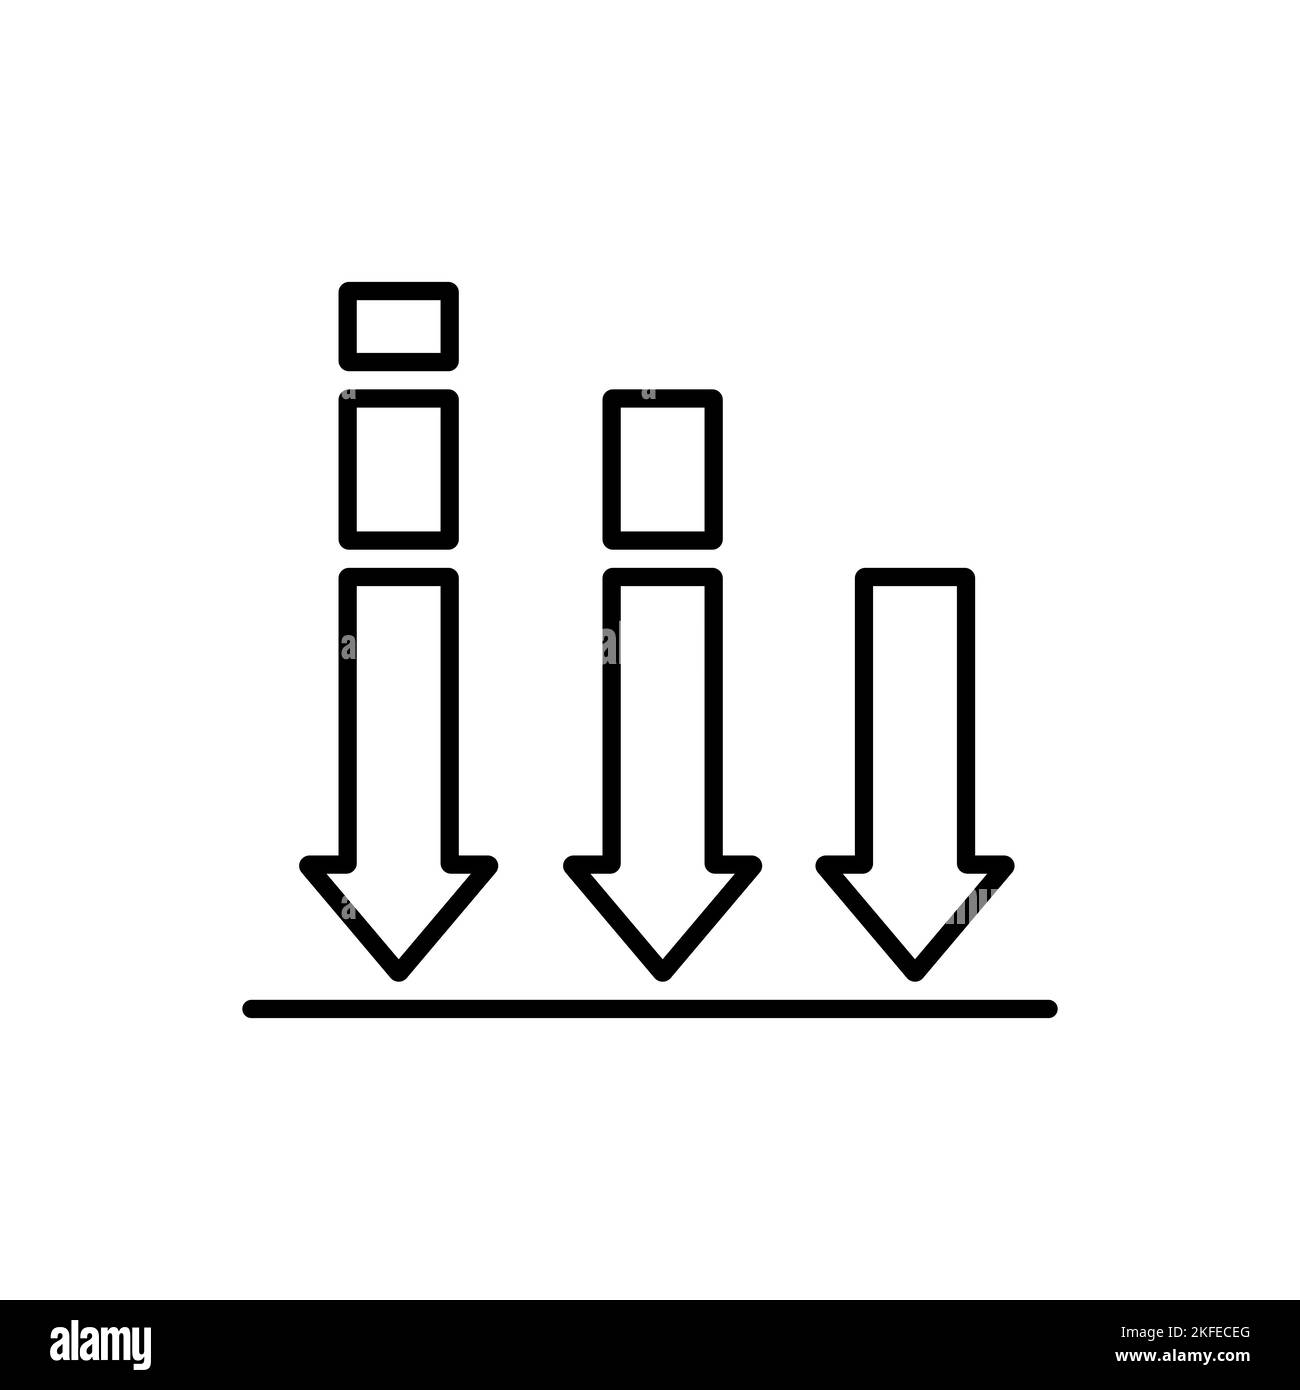 graph diagram chart icon growth  Stock Vector